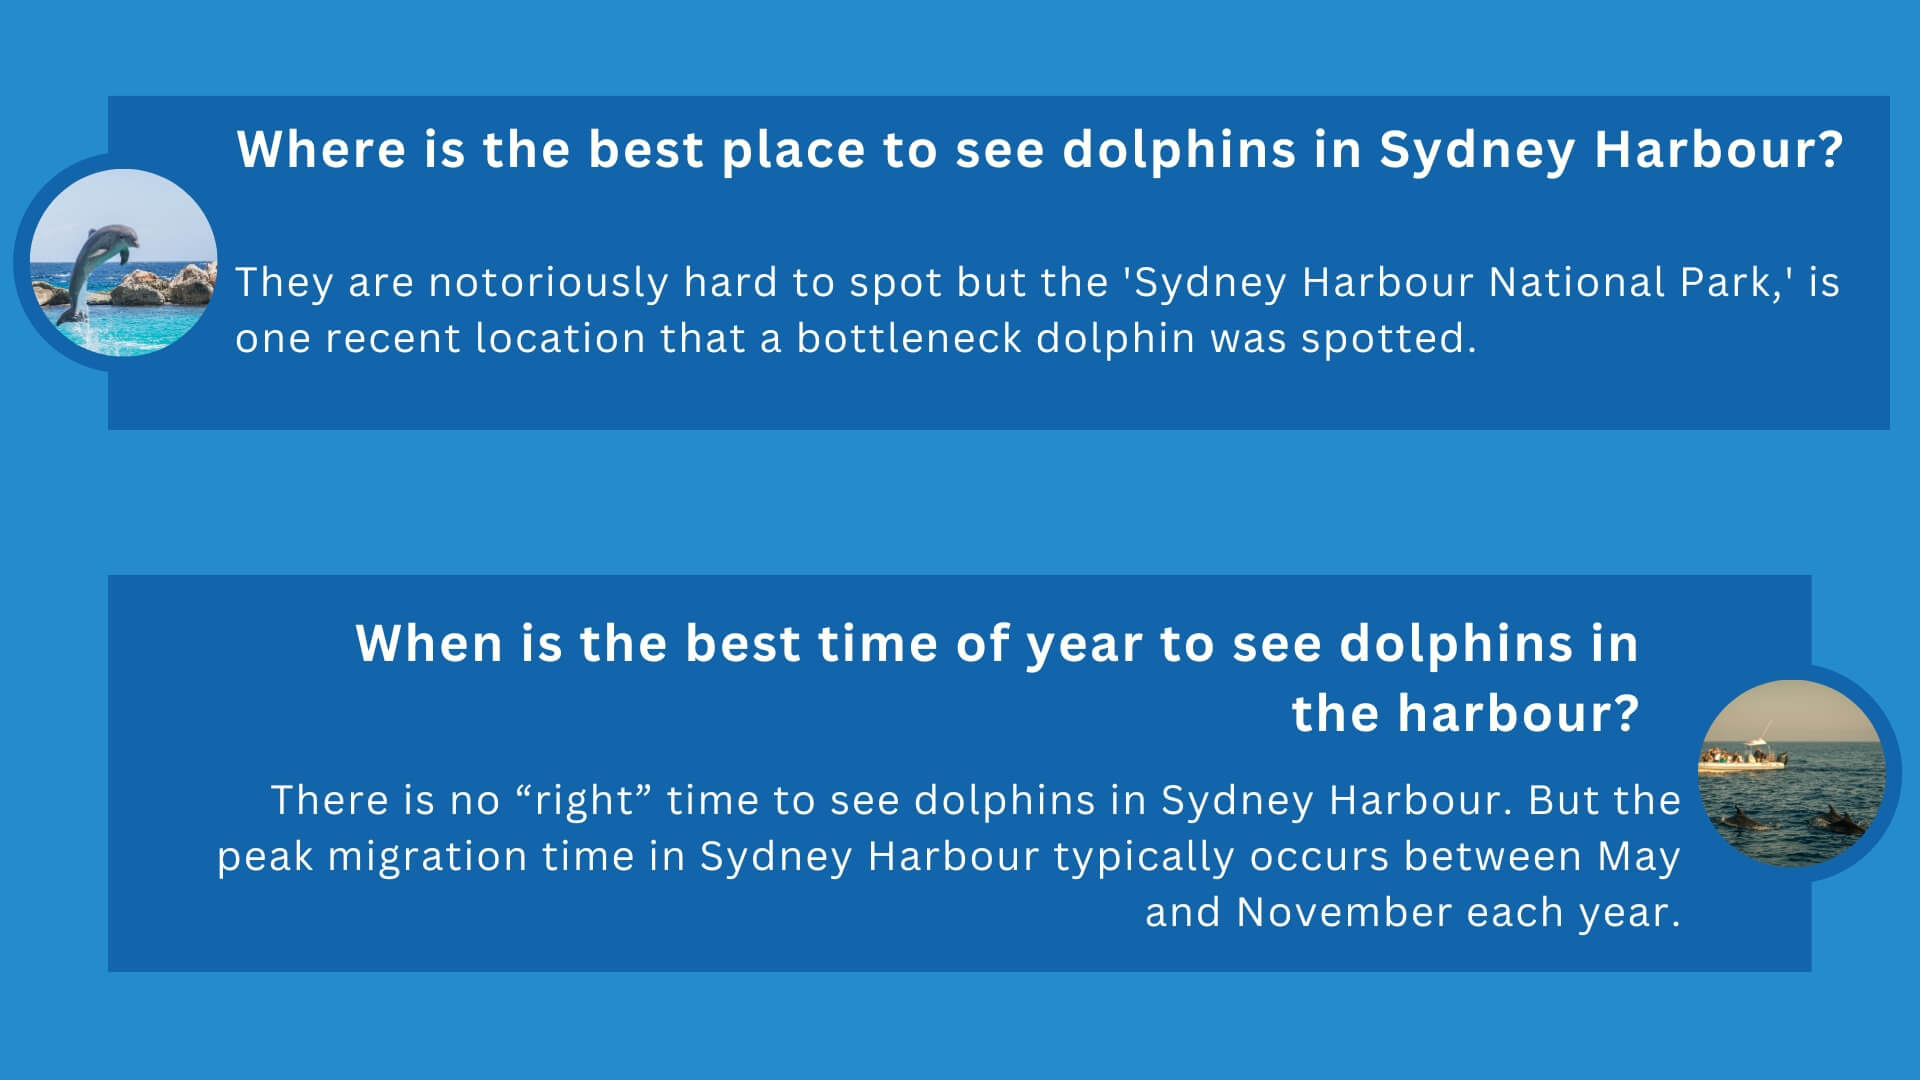 An infographic about dolphins in sydney harbour with two questions and answers related to it.